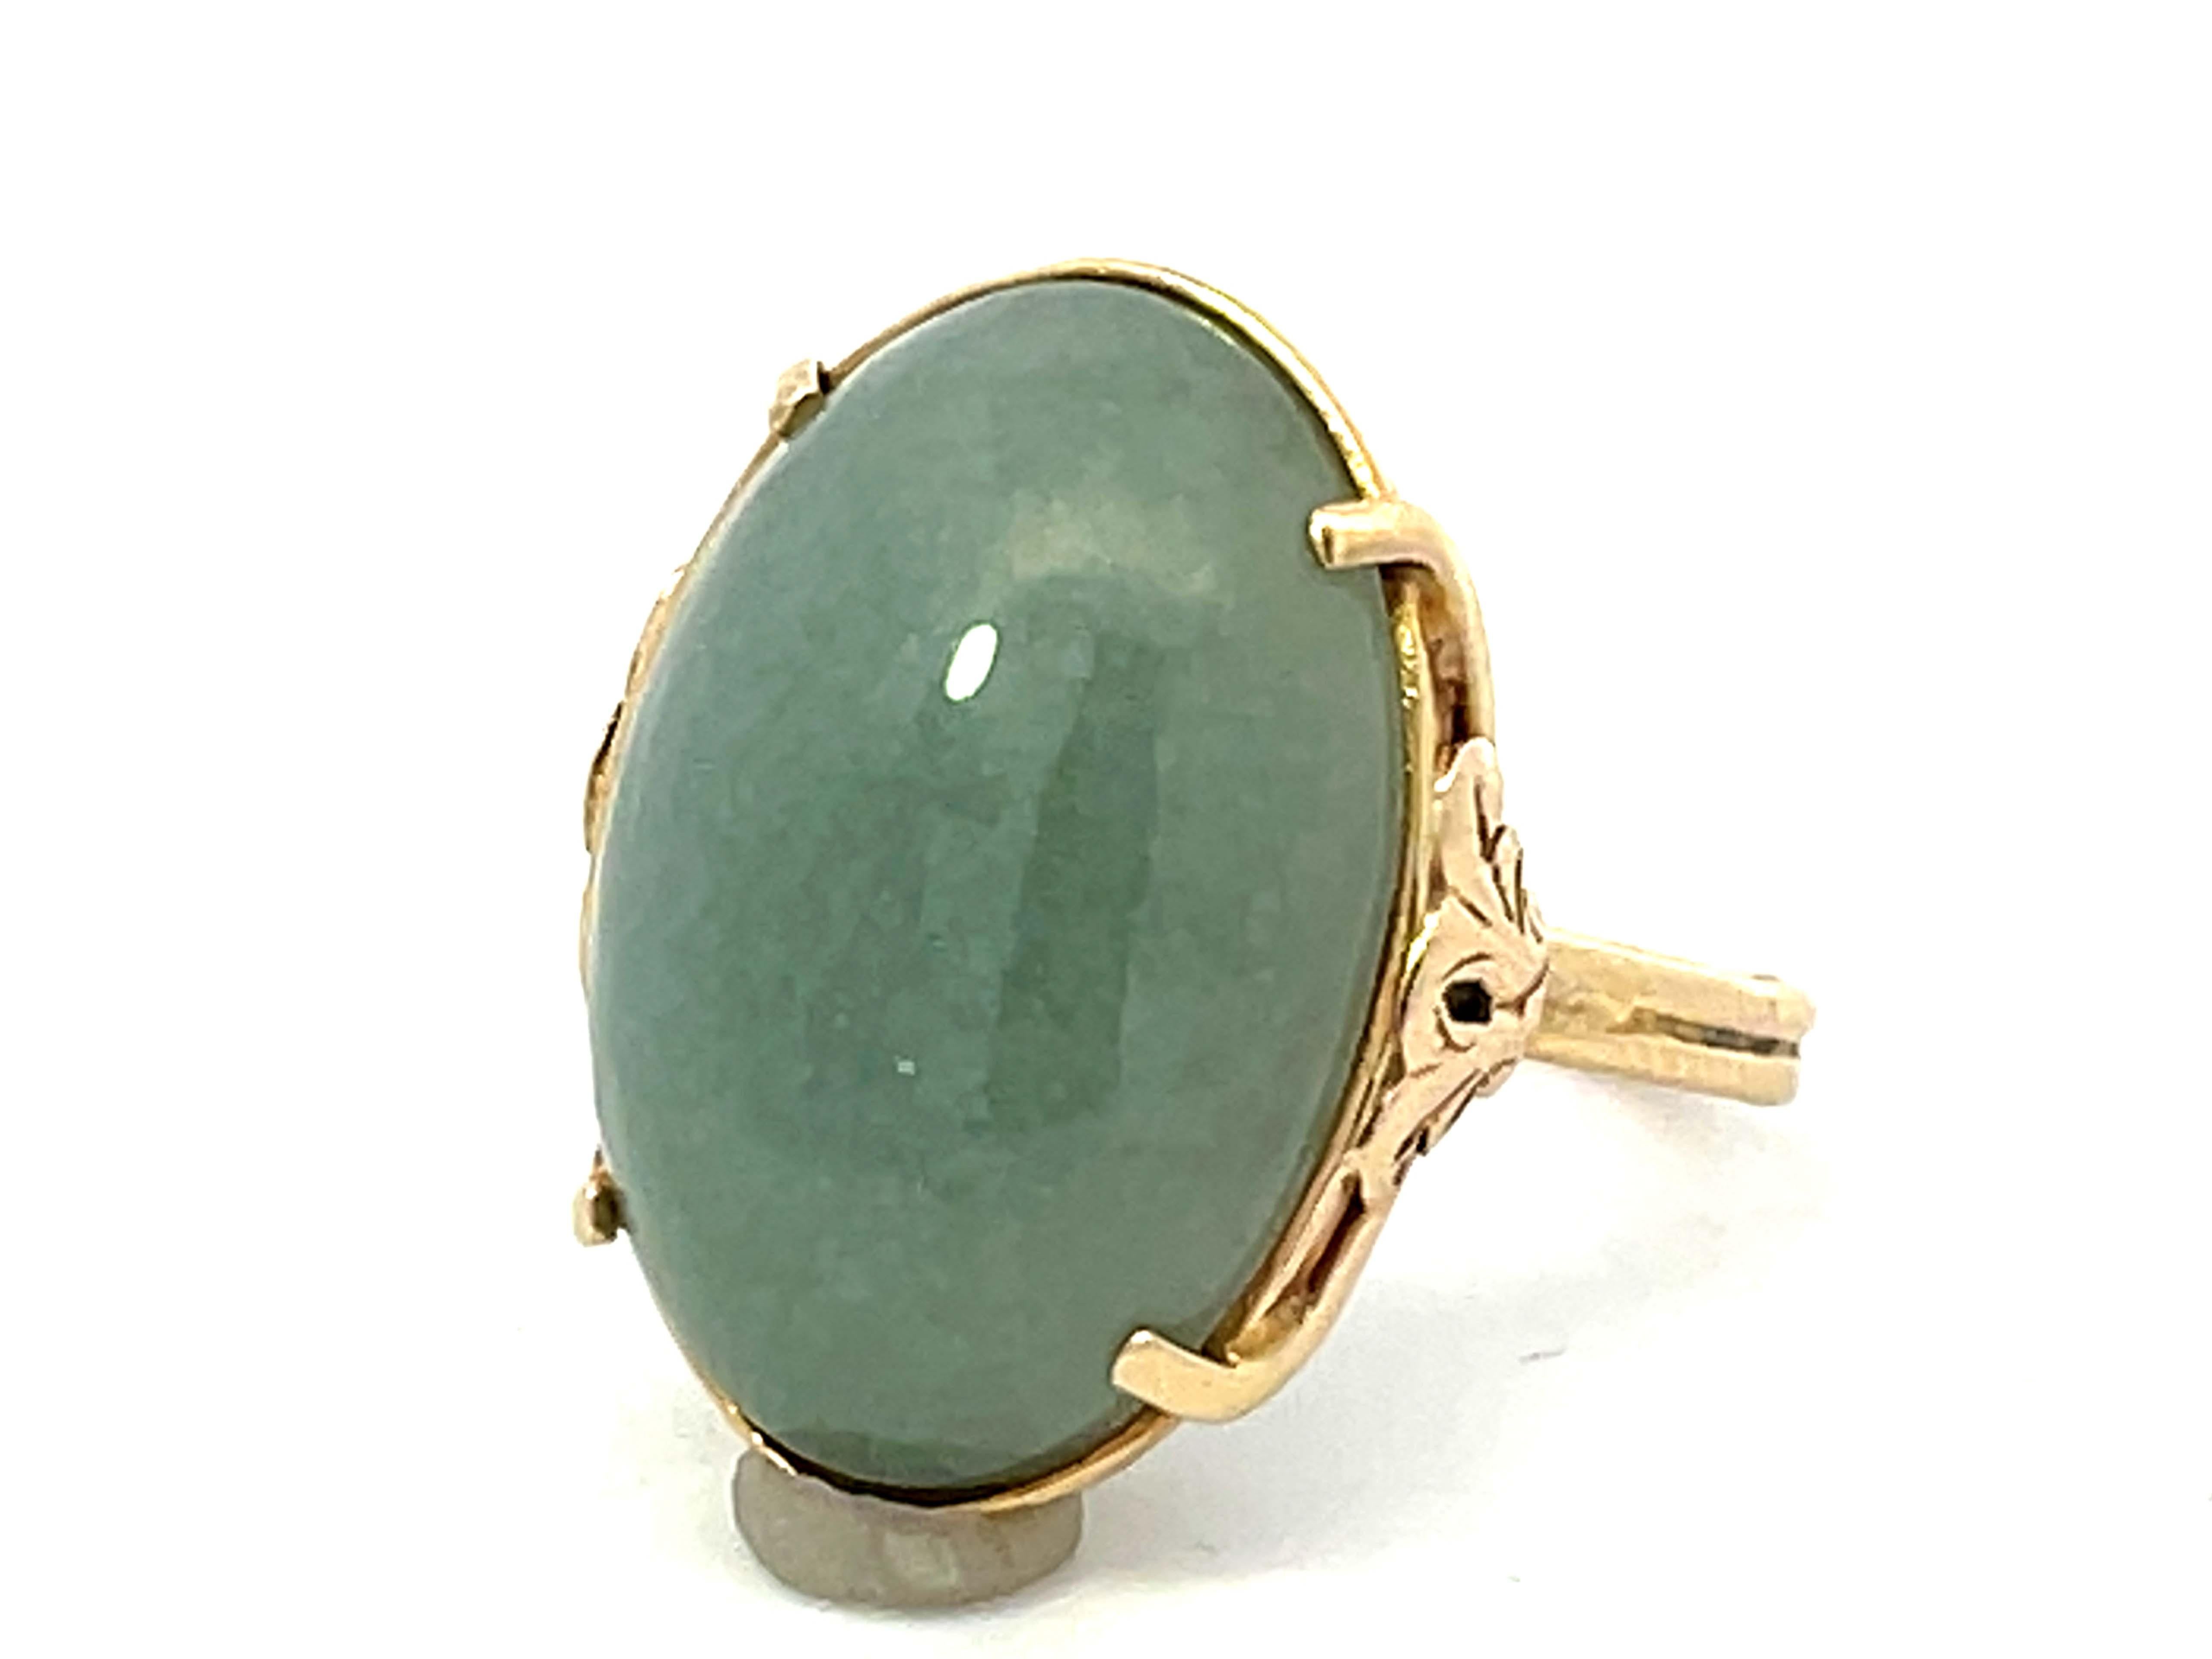 Mings Oval Cabochon Green Jade Ring 14k Yellow Gold In Excellent Condition For Sale In Honolulu, HI